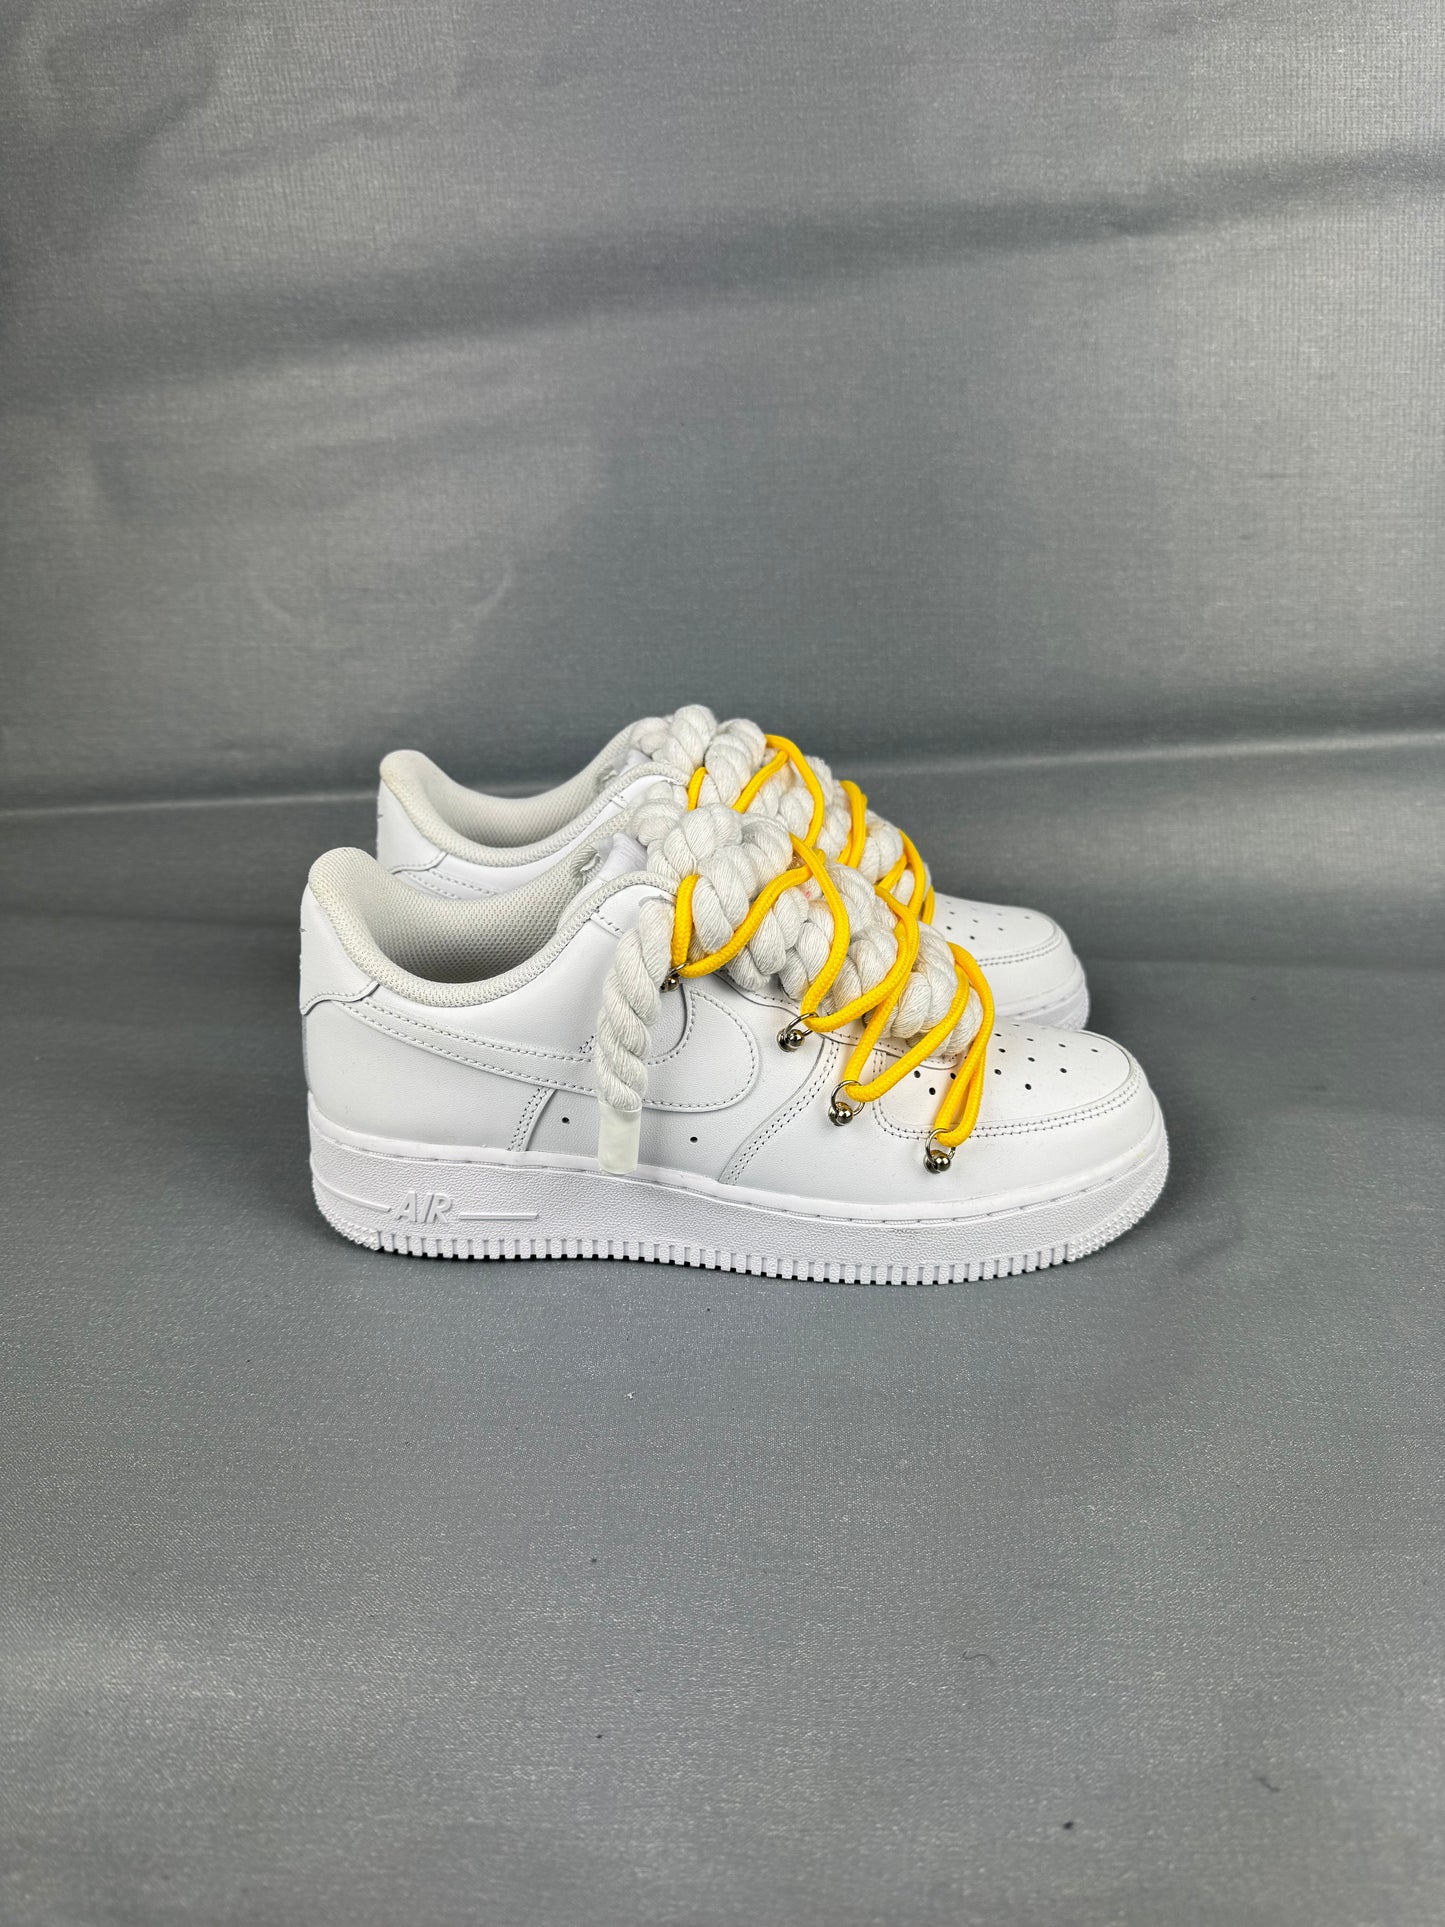 AF1 White | Spesh Laces Yellow